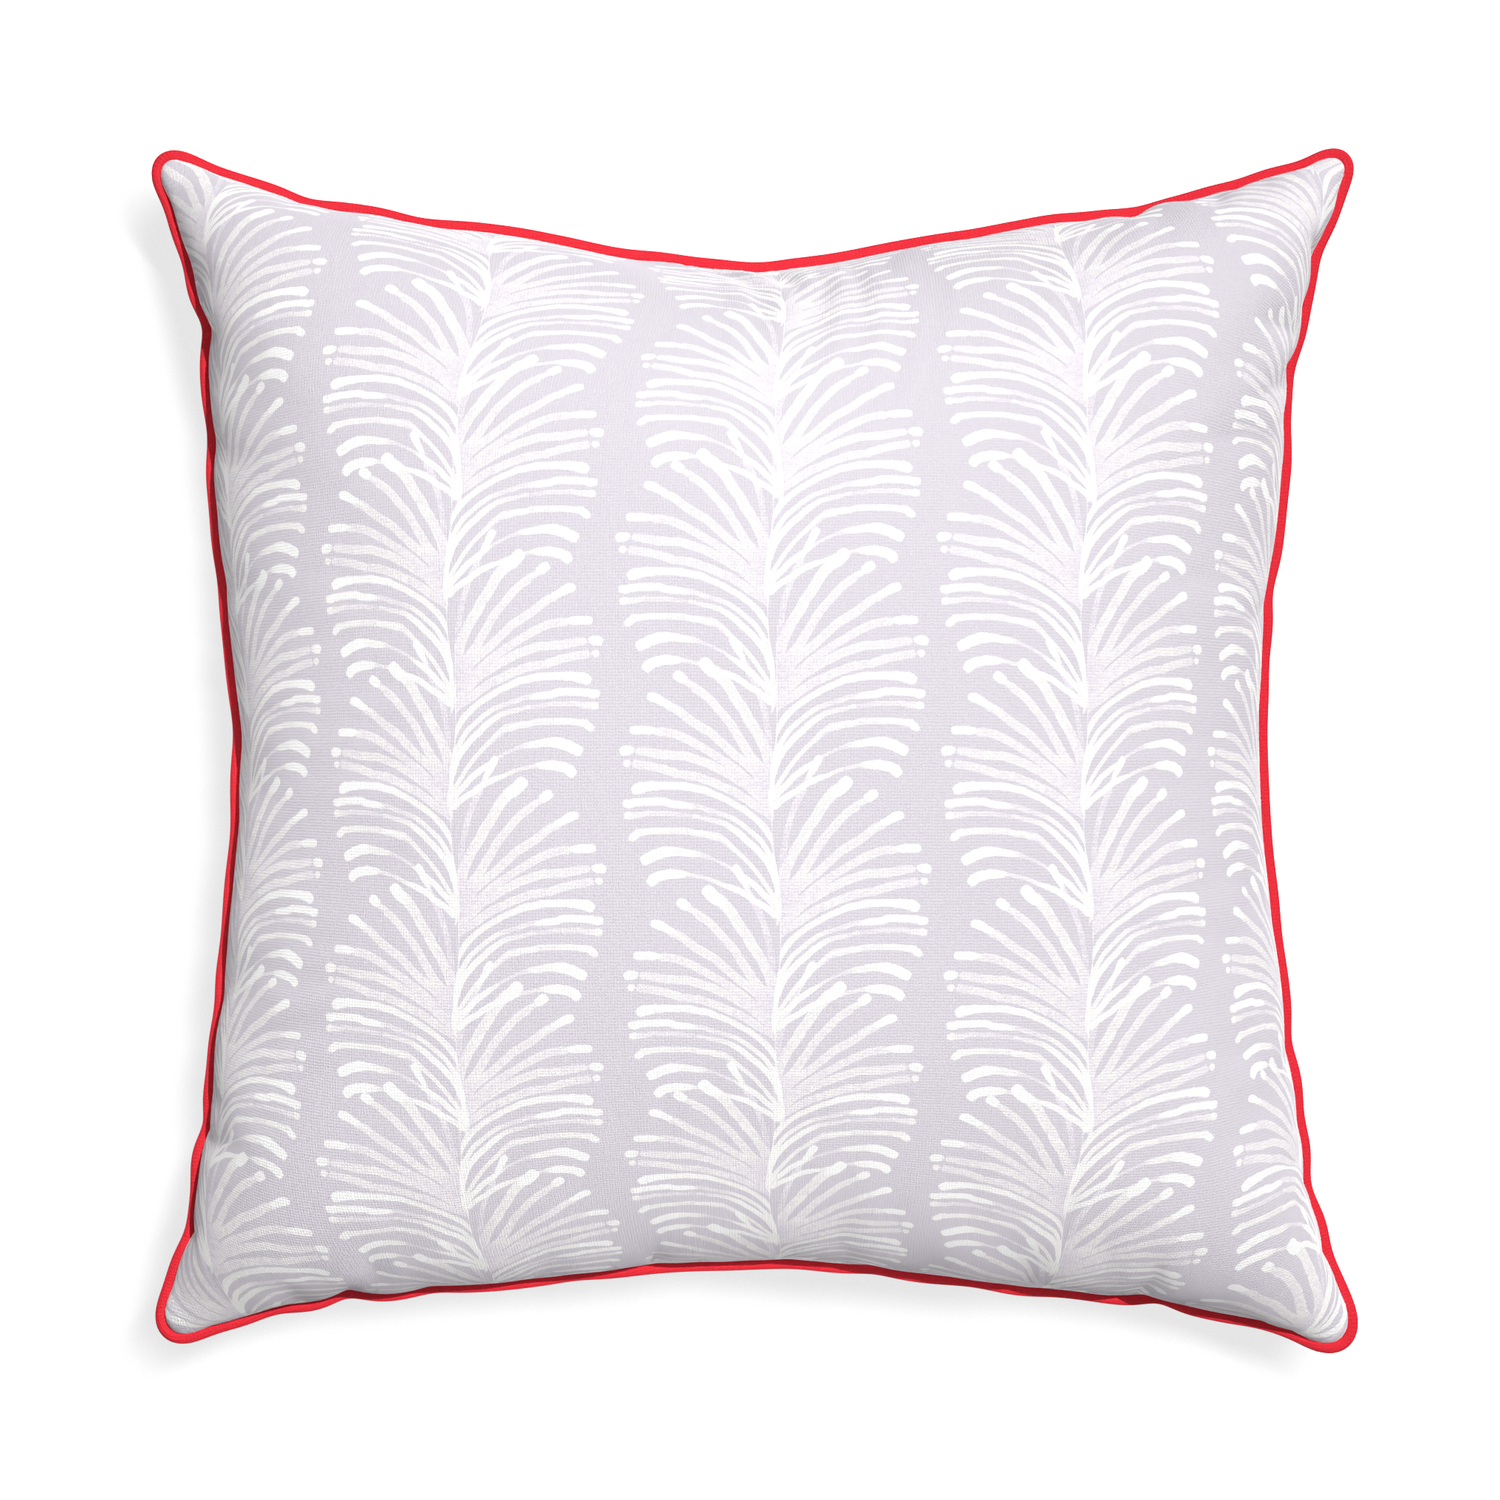 Euro-sham emma lavender custom pillow with cherry piping on white background